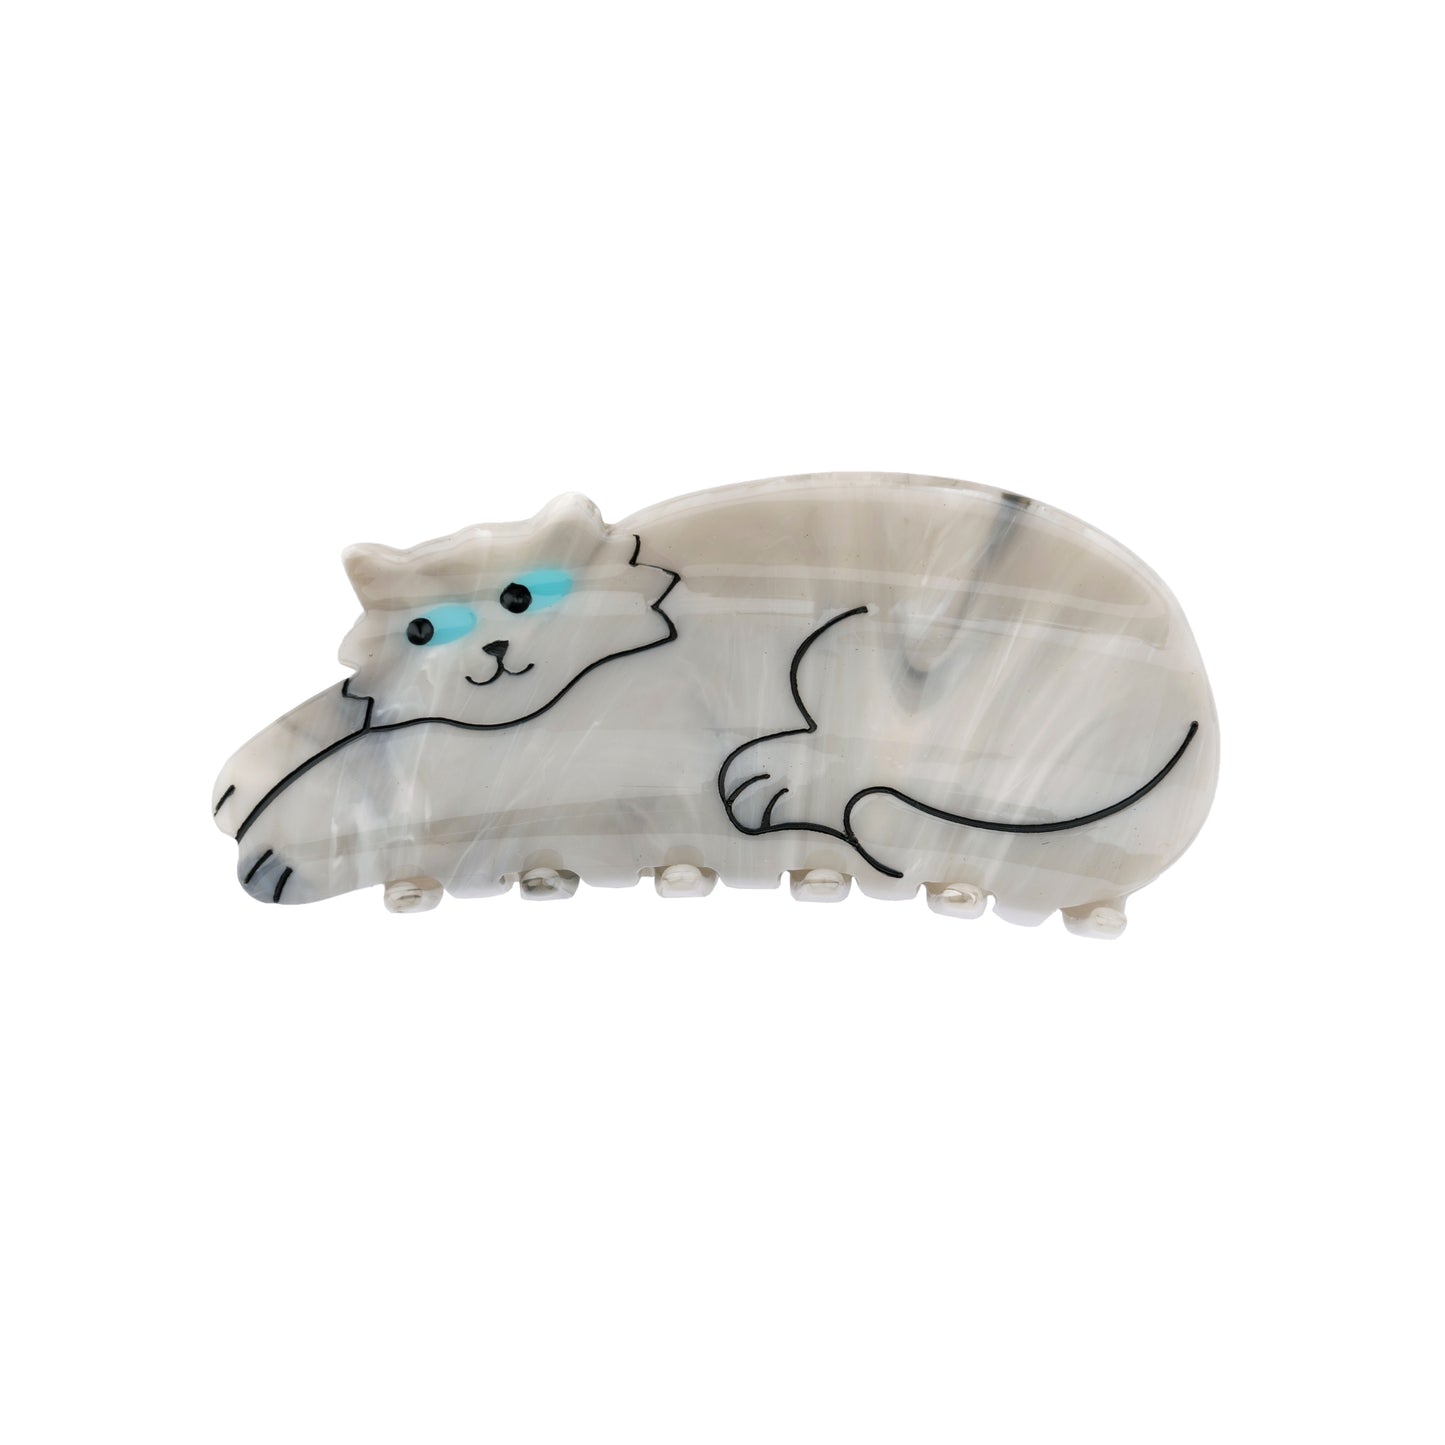 Ghost Cat Pin – Coucou Suzette